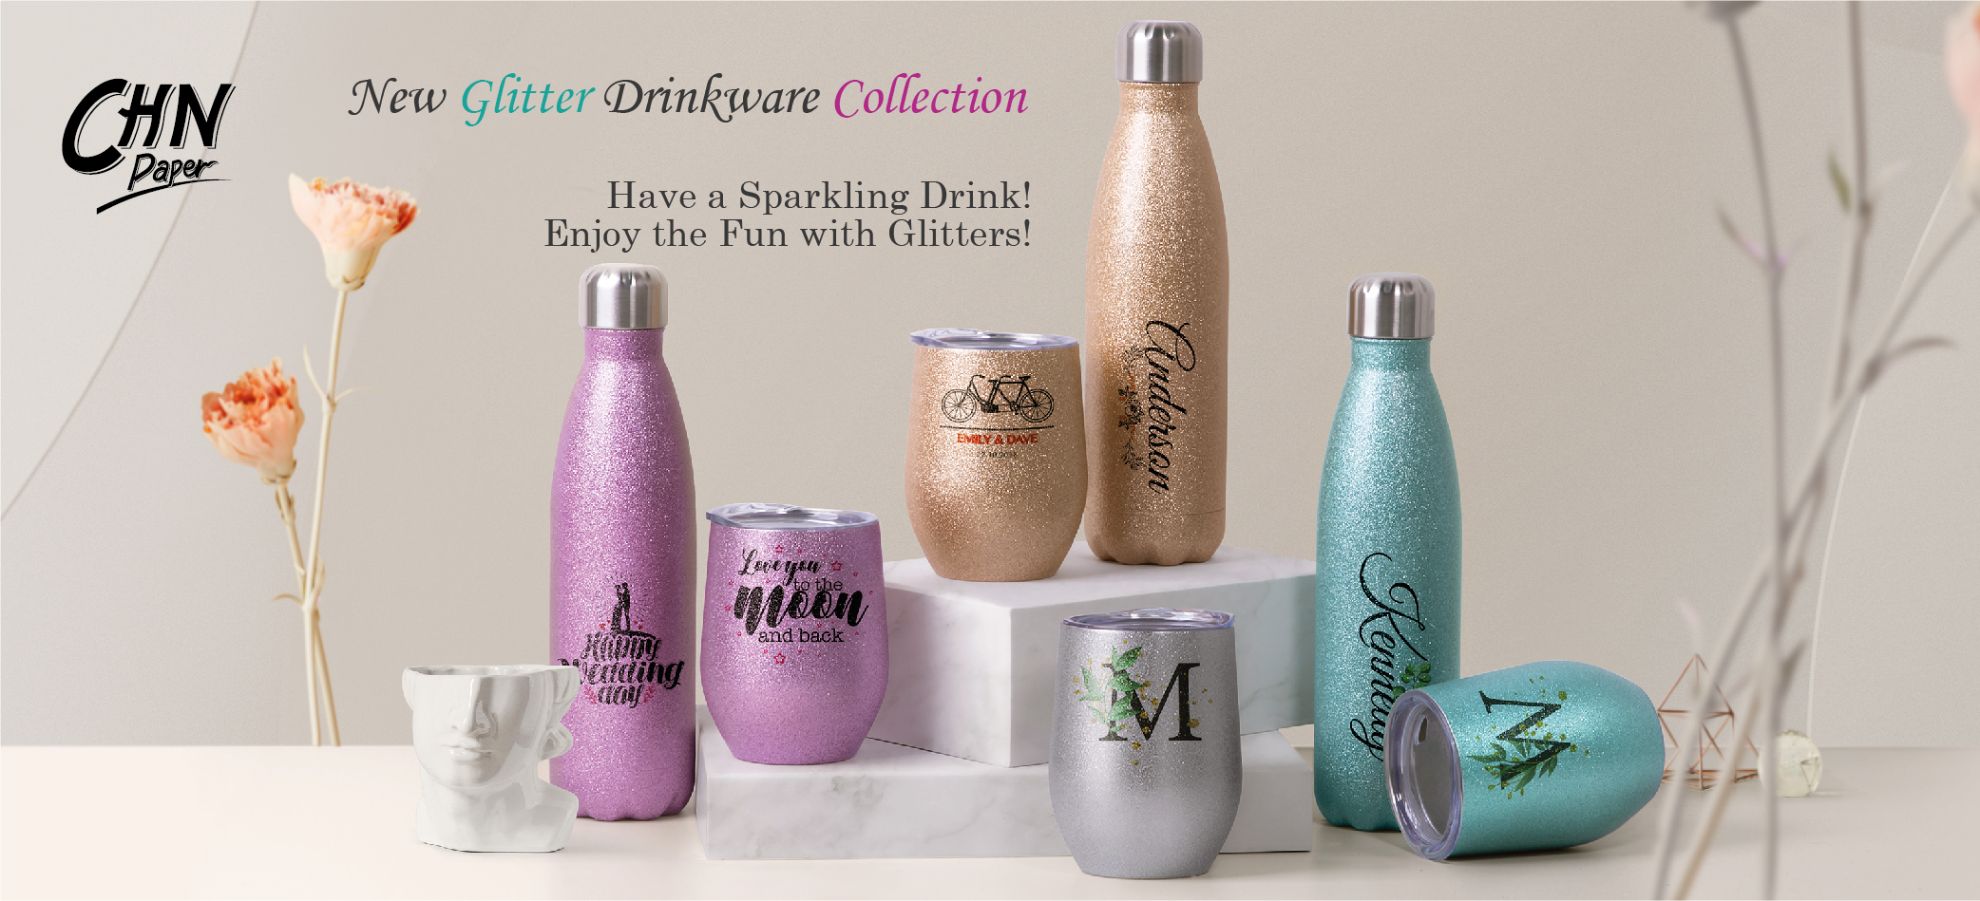 Glitter Drinkware Collection